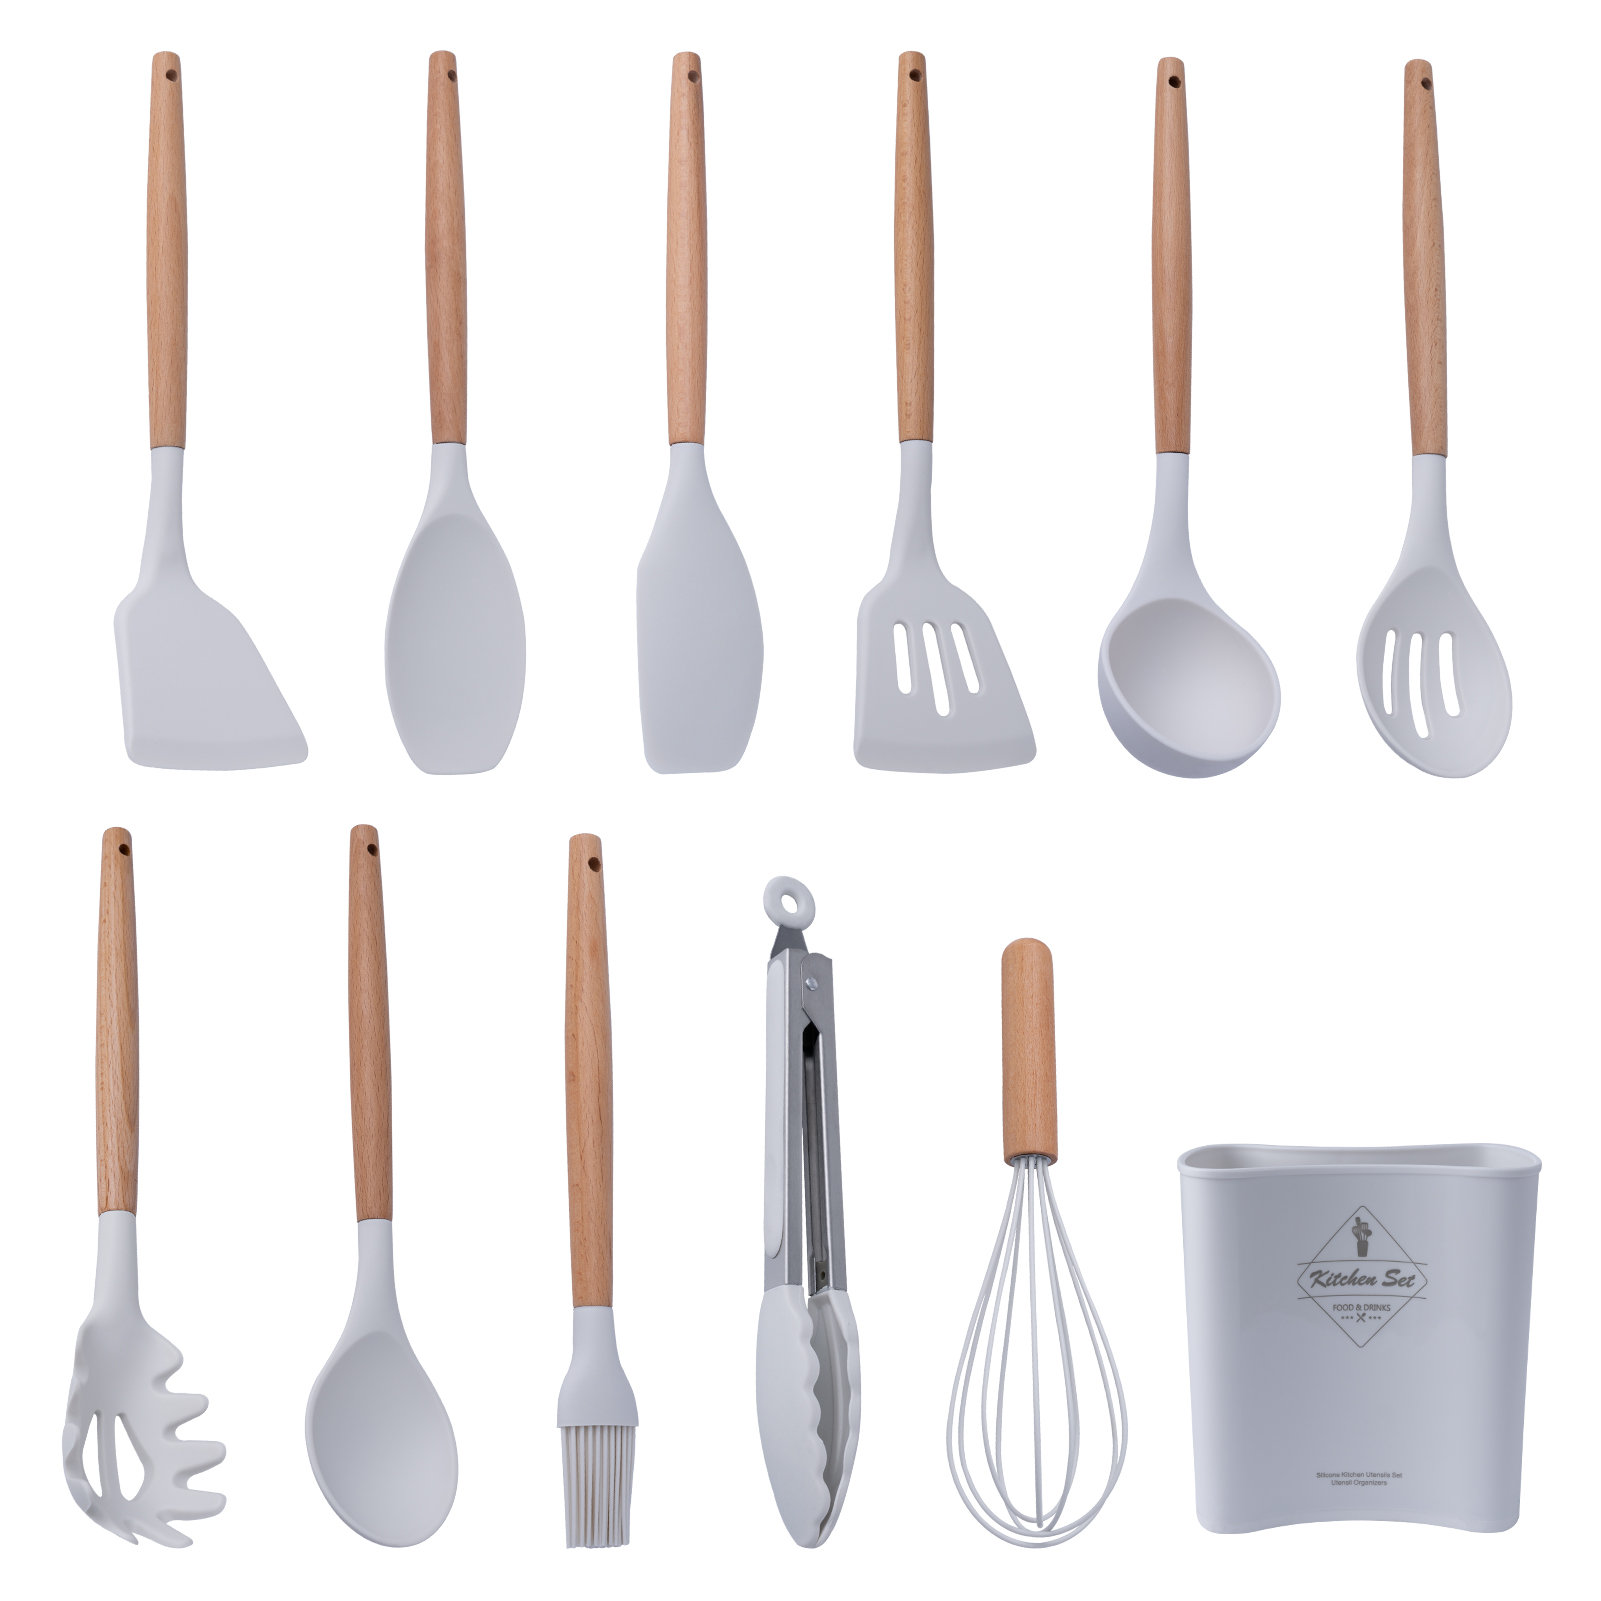  COOK With COLOR 7 Pc Kitchen Gadget Set Stainless Steel  Utensils with Soft Touch Grey Handles : Home & Kitchen